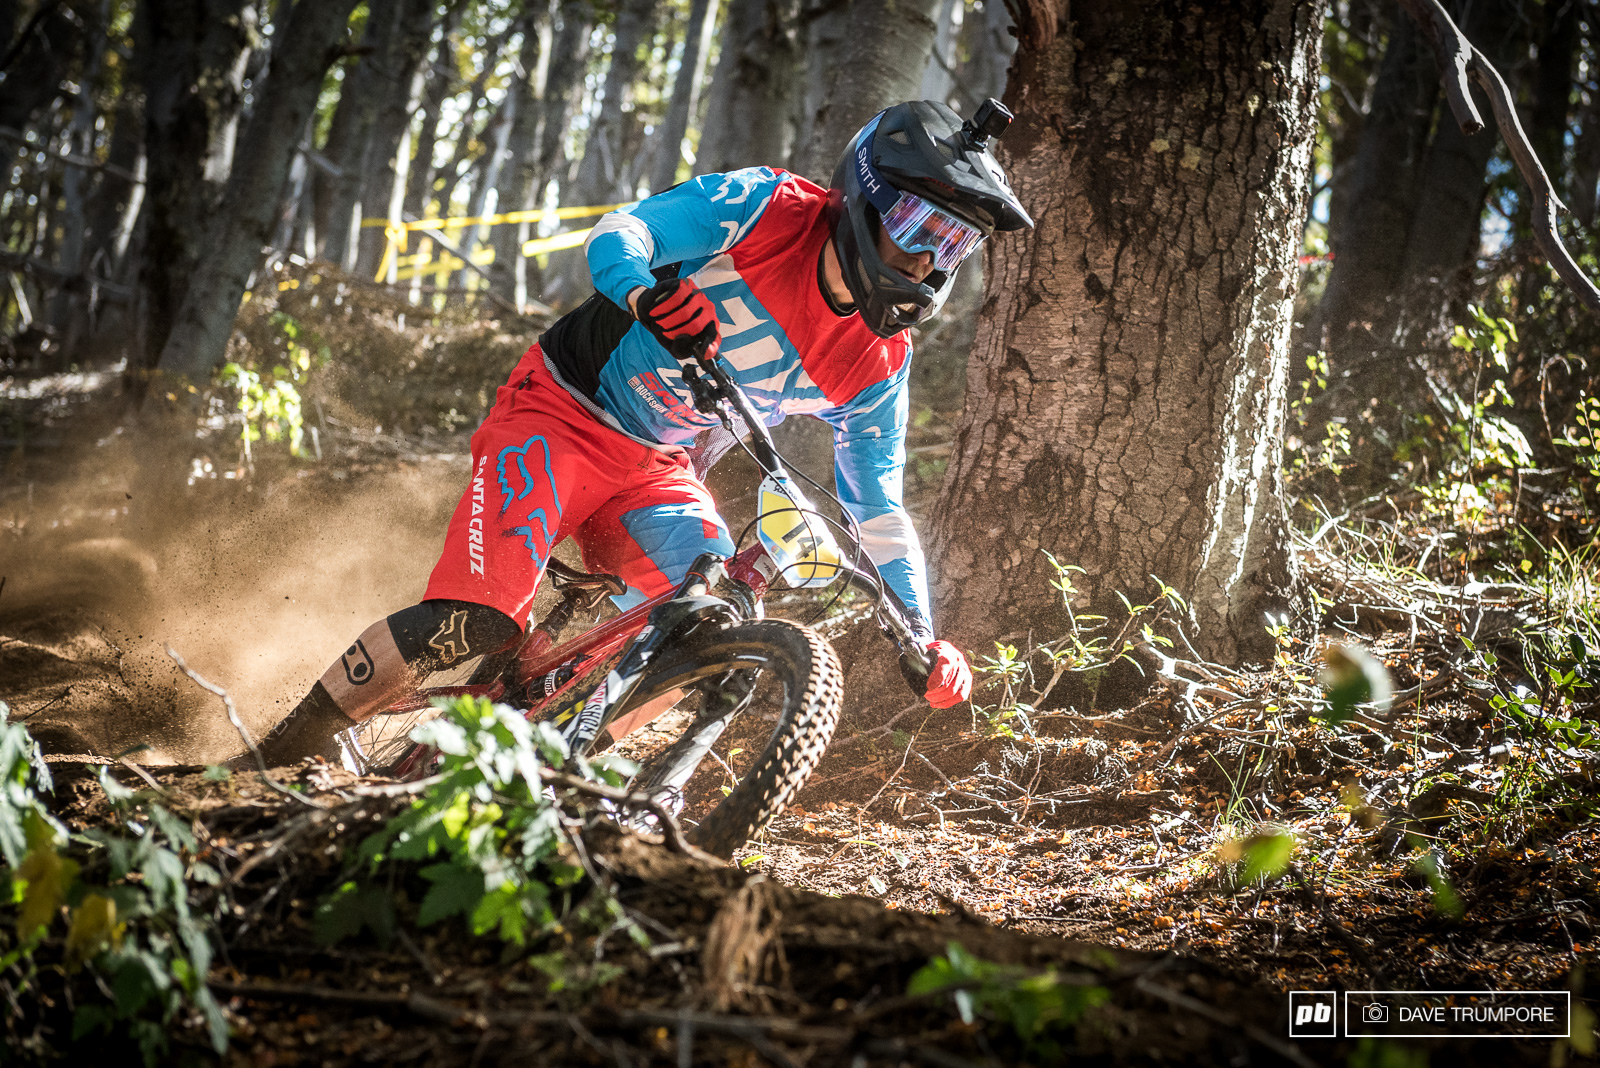 Mark Scott is loving the loose and drifty trails here in Bariloche.